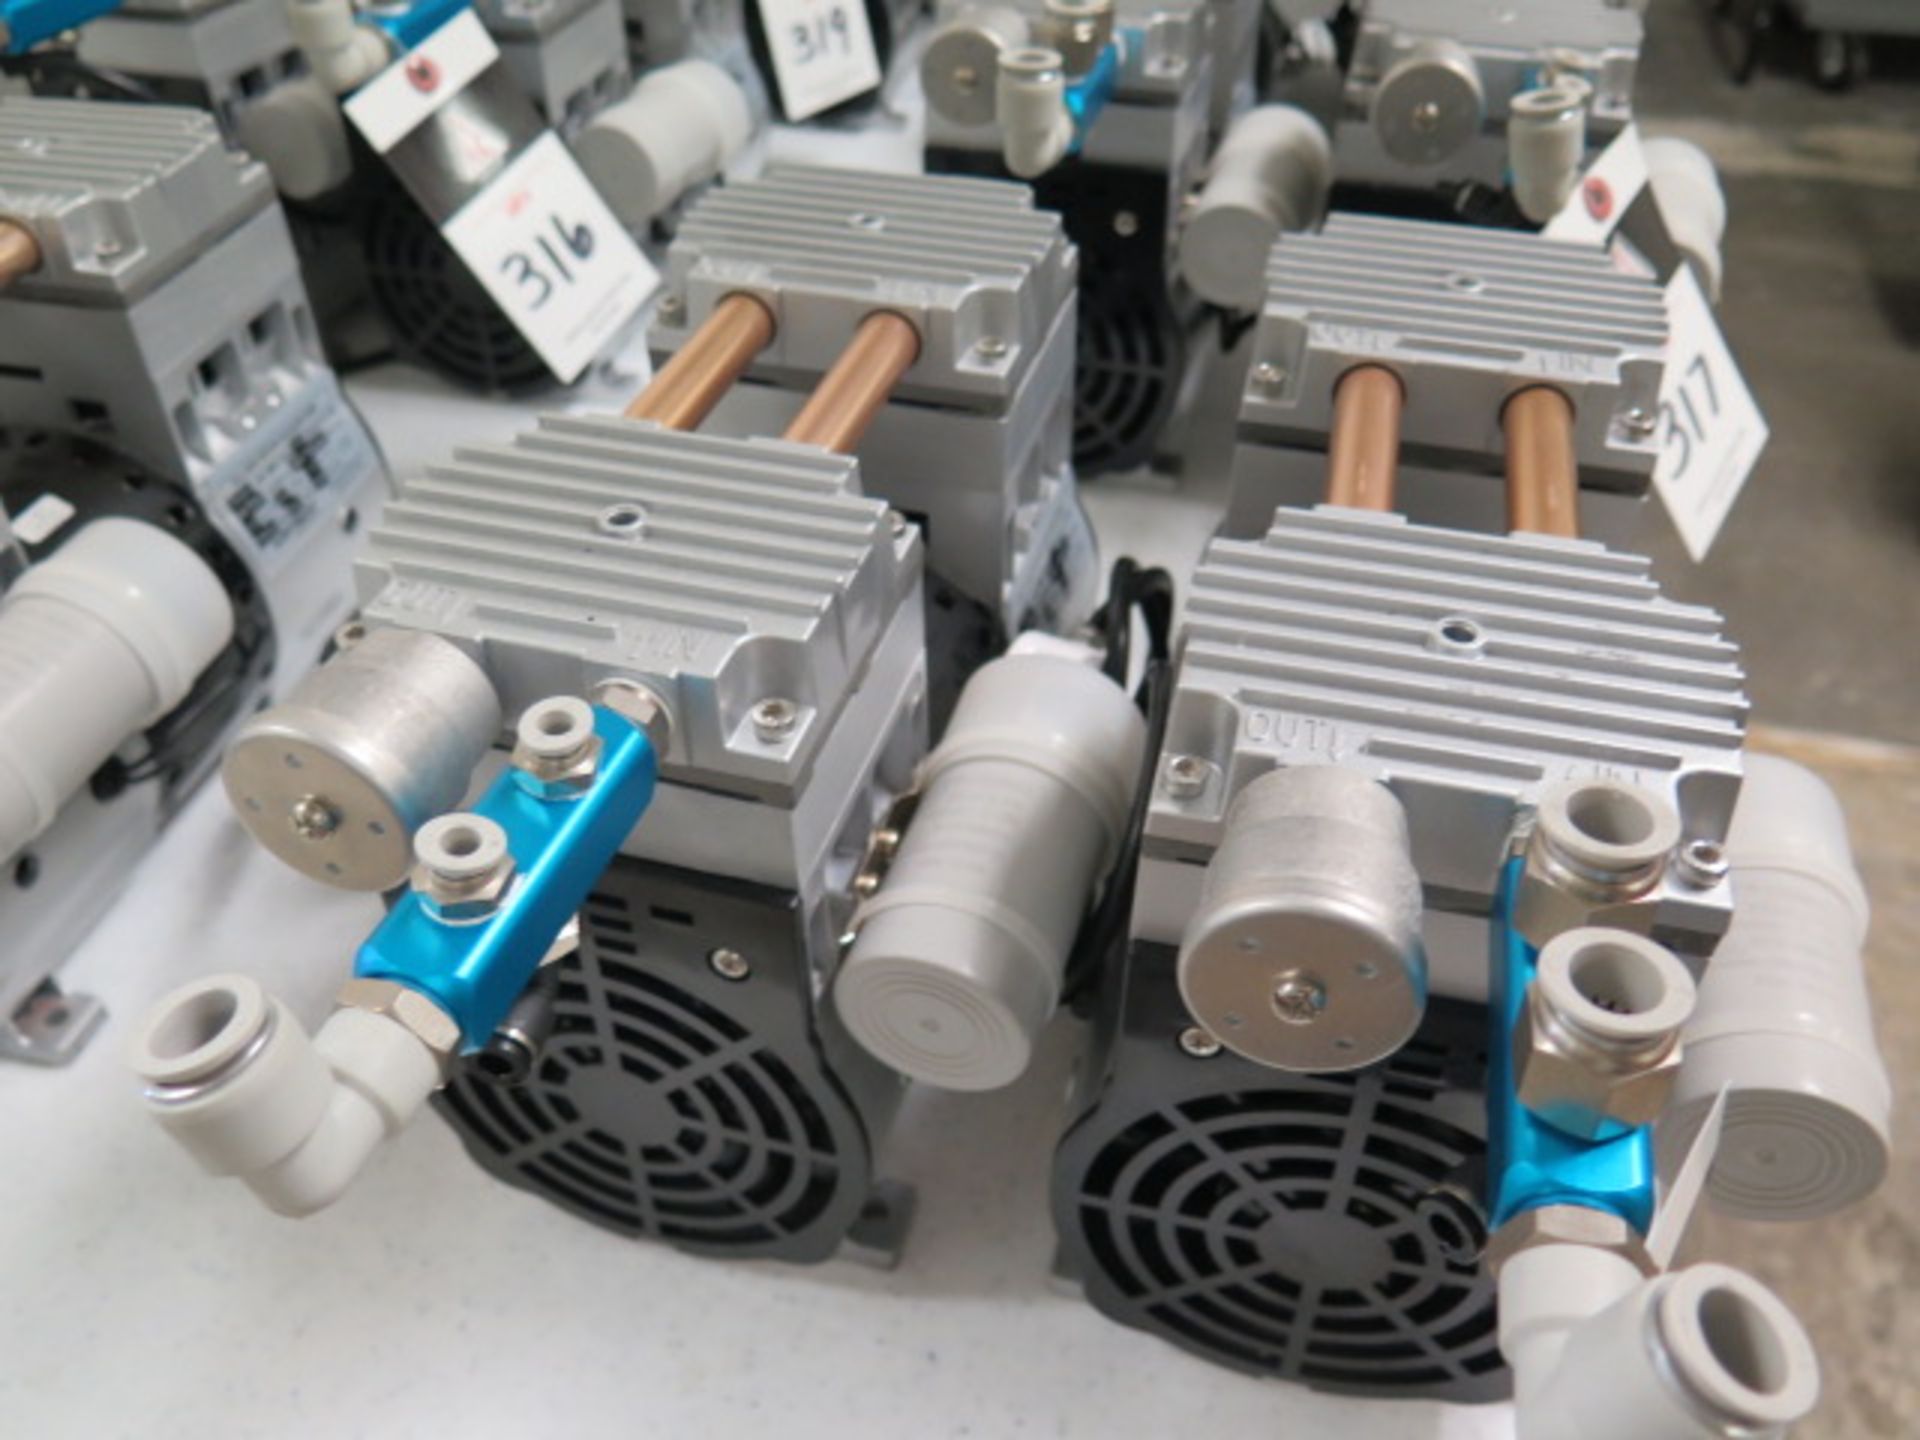 Airtech HP-200V 80 torr Vacuum Pumps (2) 200-240V (SOLD AS-IS - NO WARRANTY) - Image 4 of 7